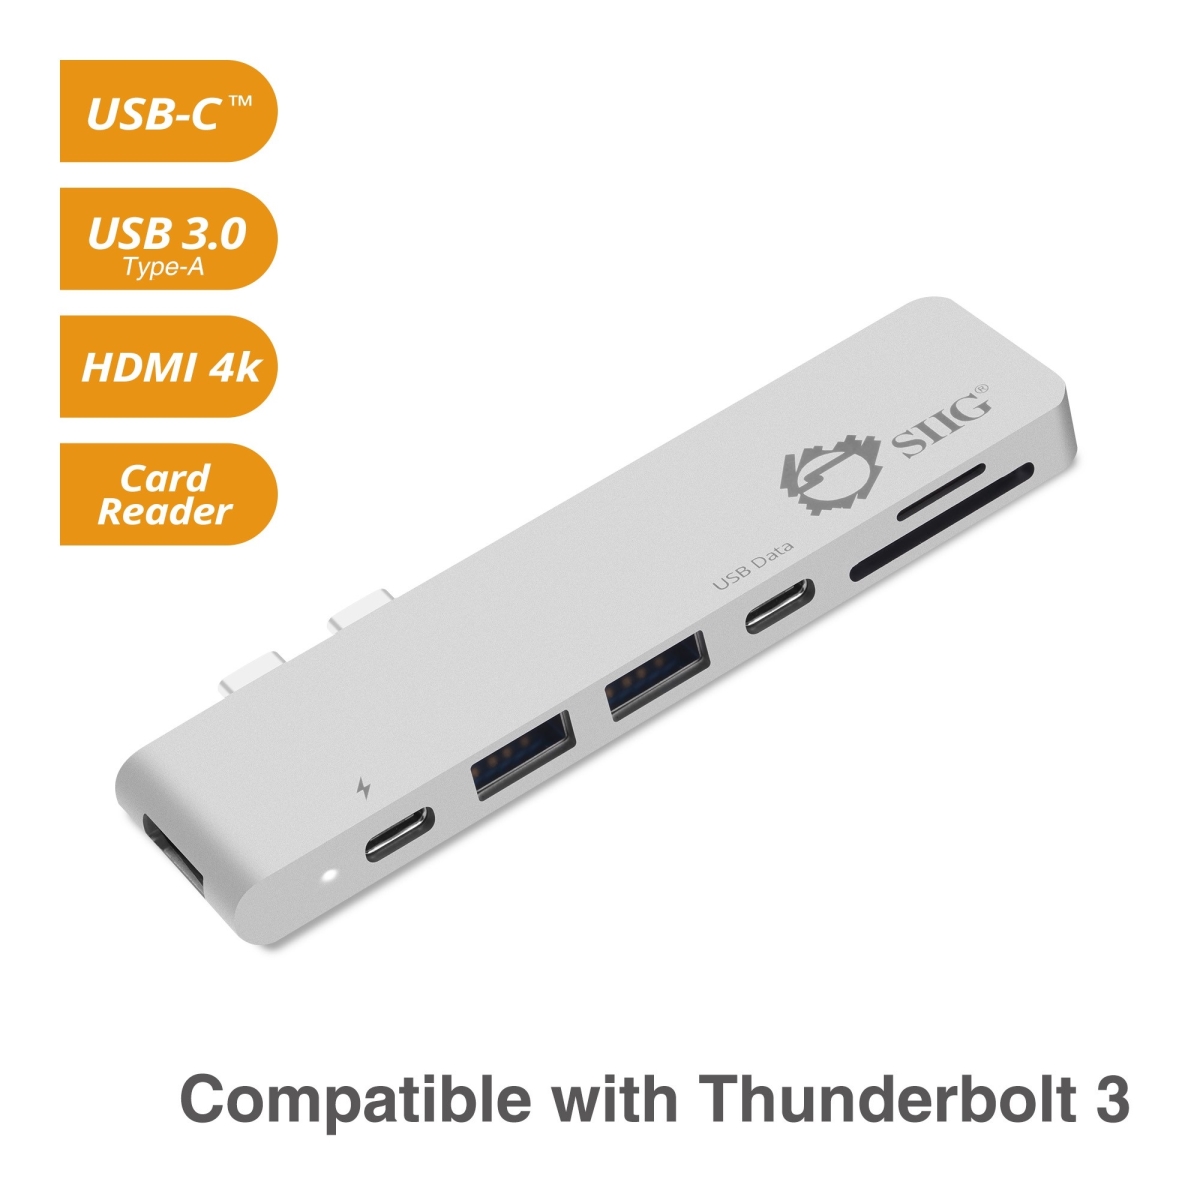 Picture of SIIG JU-TB0412-S1 Thunderbolt 3 USB-C Hub HDMI with Card Reader & PD Adapter - Silver